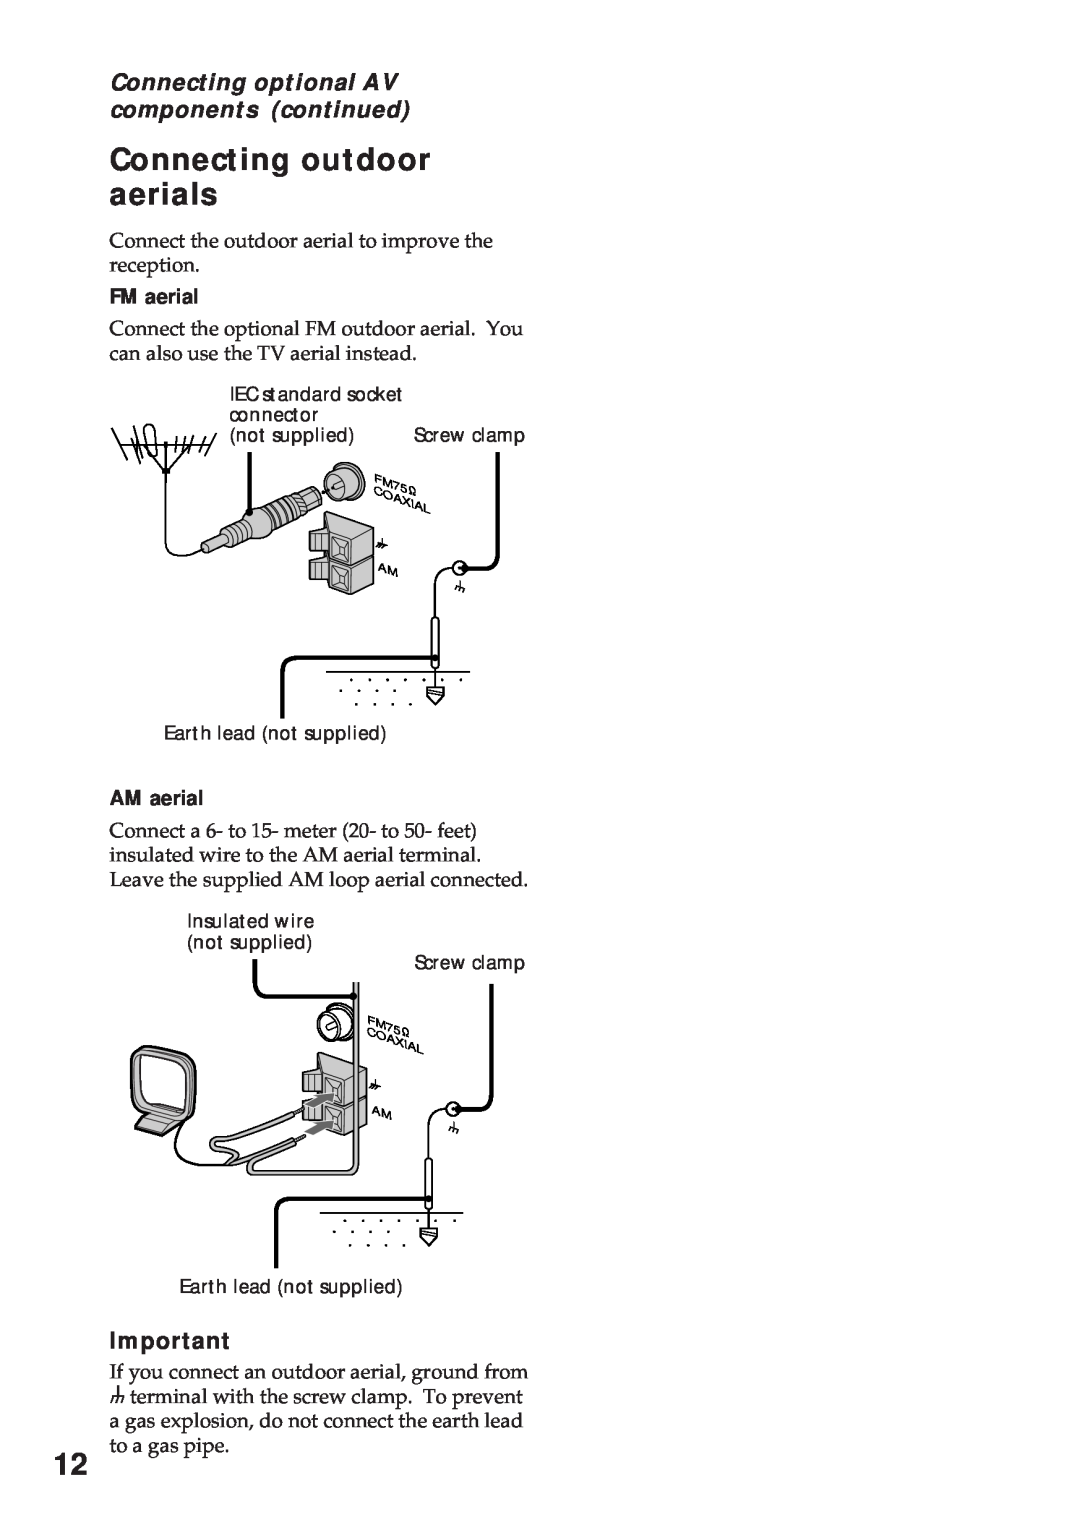 Sony MHC-RX100AV operating instructions Connecting outdoor aerials, Connecting optional AV components continued 